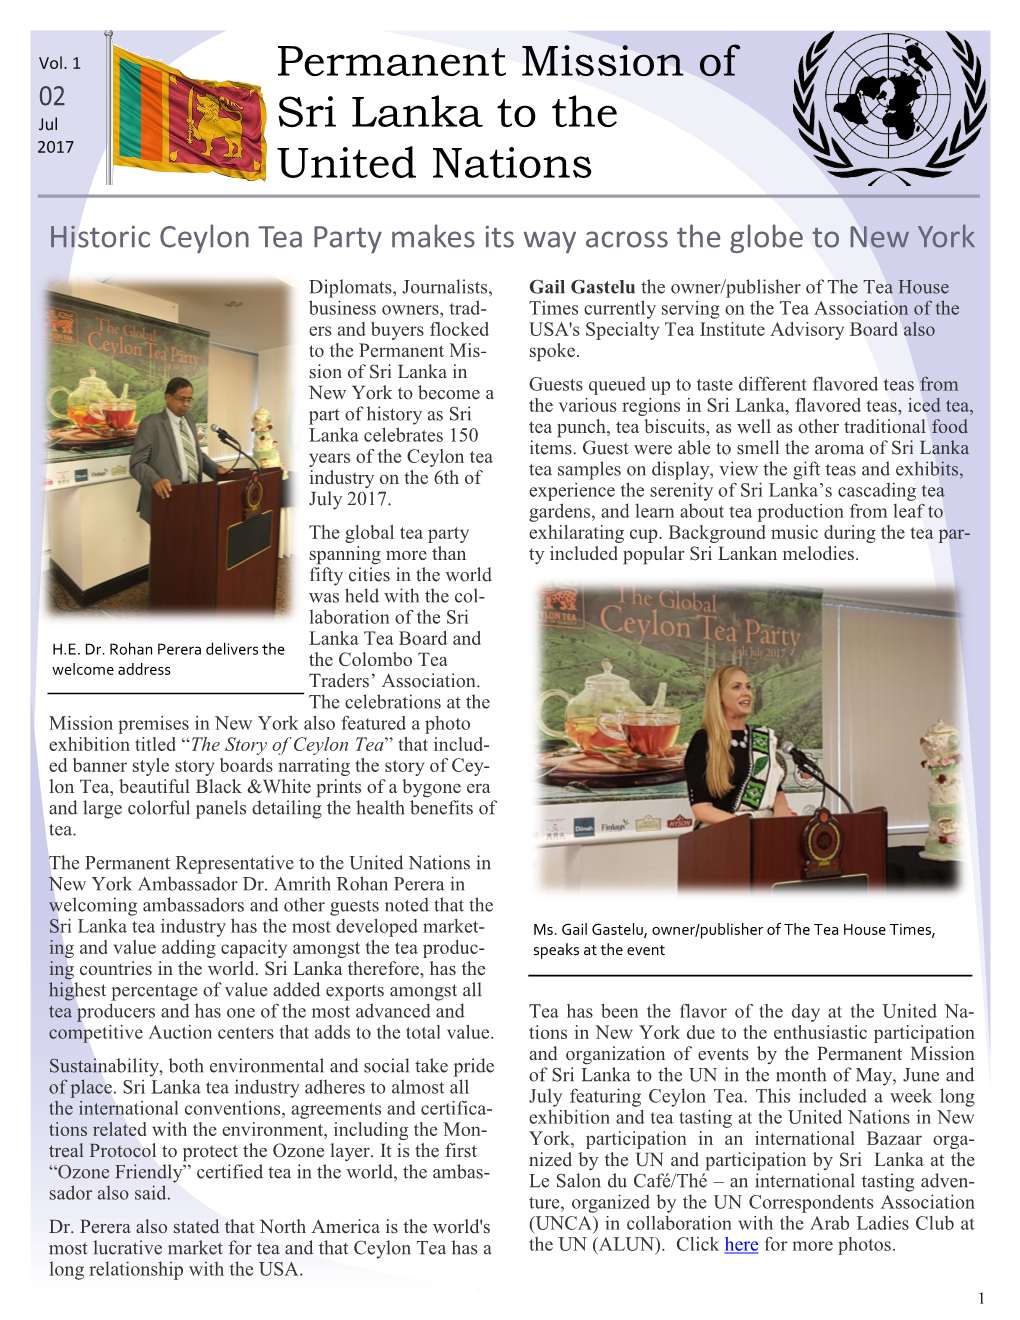 Permanent Mission of Sri Lanka to the United Nations